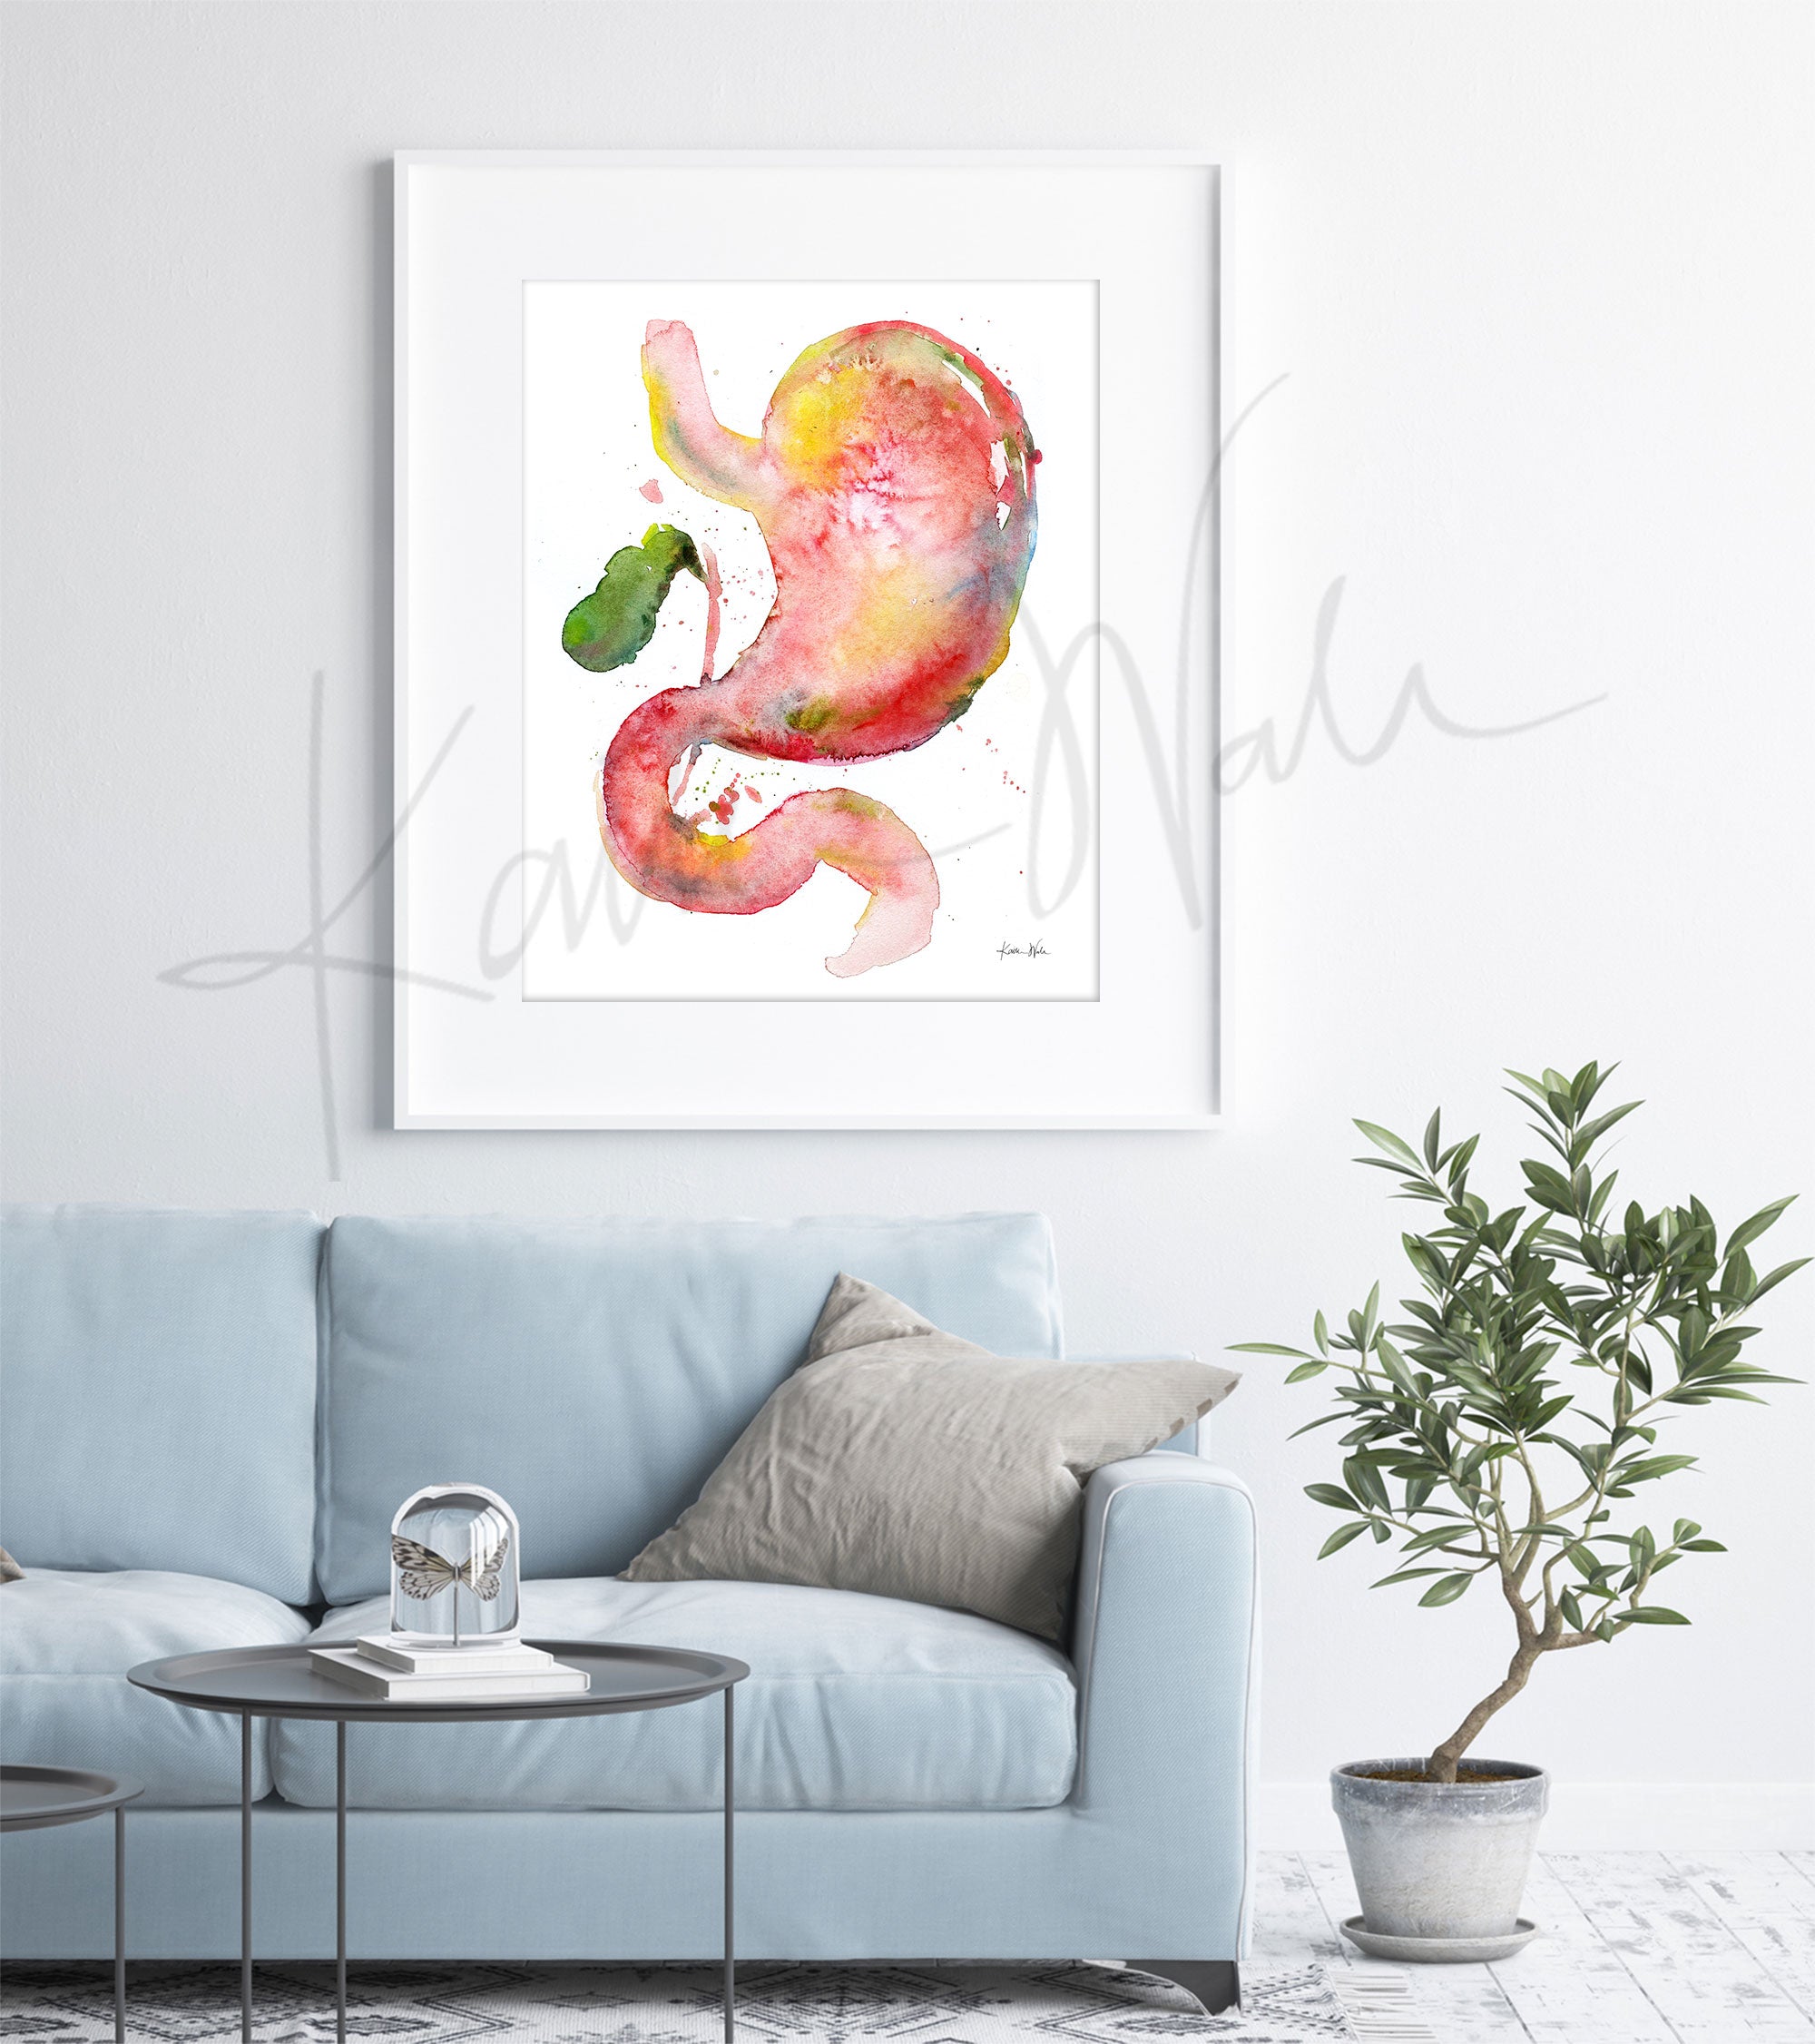 Framed watercolor painting of a stomach, duodenum, and gallbladder combination. The painting is hanging over a blue couch.